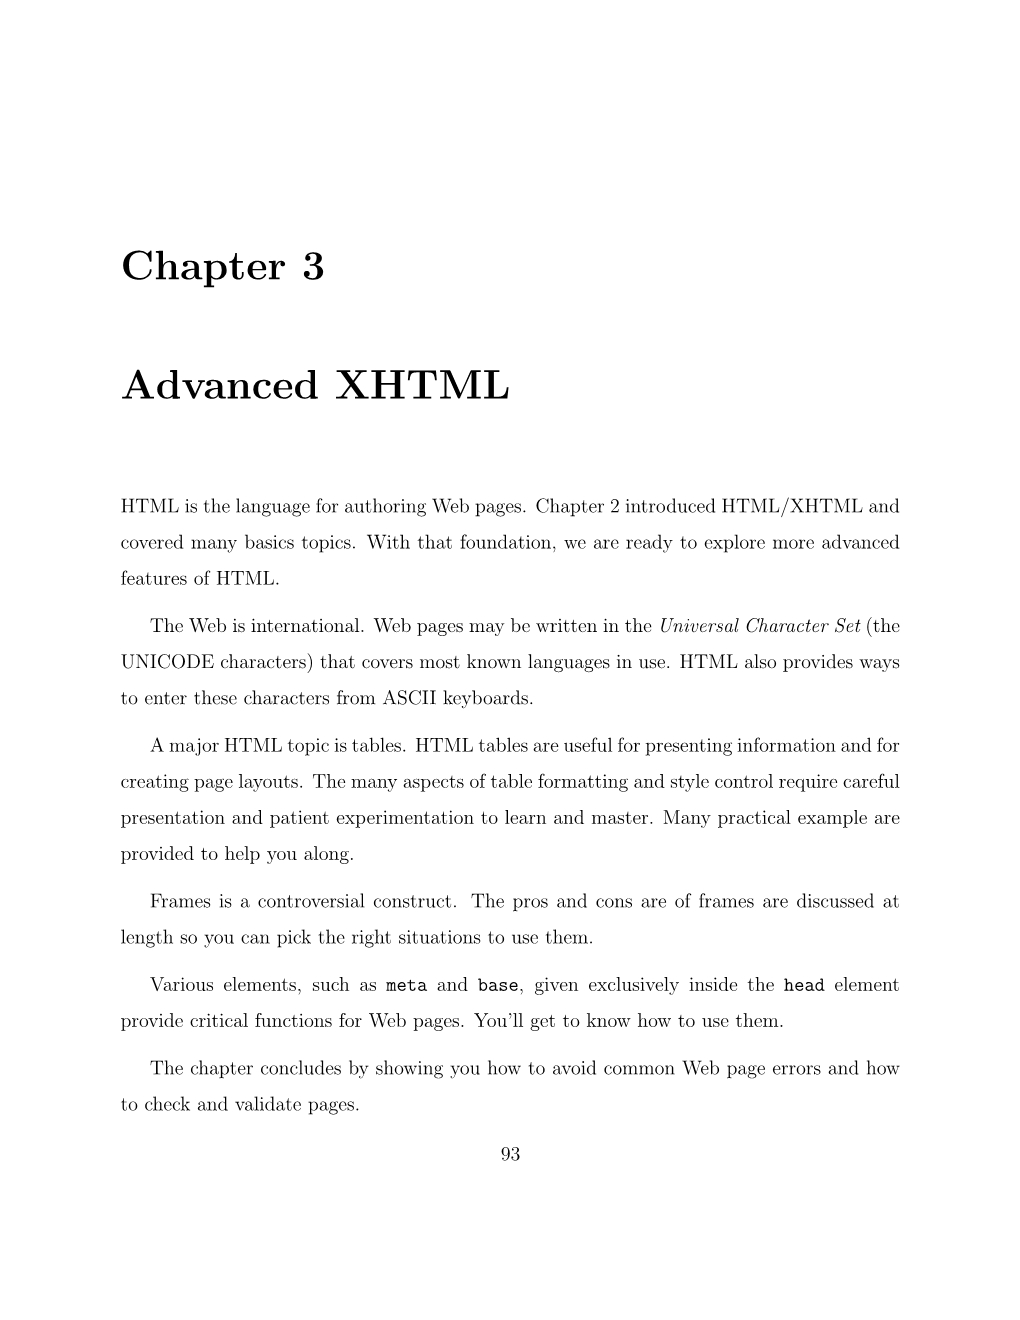 Chapter 3 Advanced XHTML